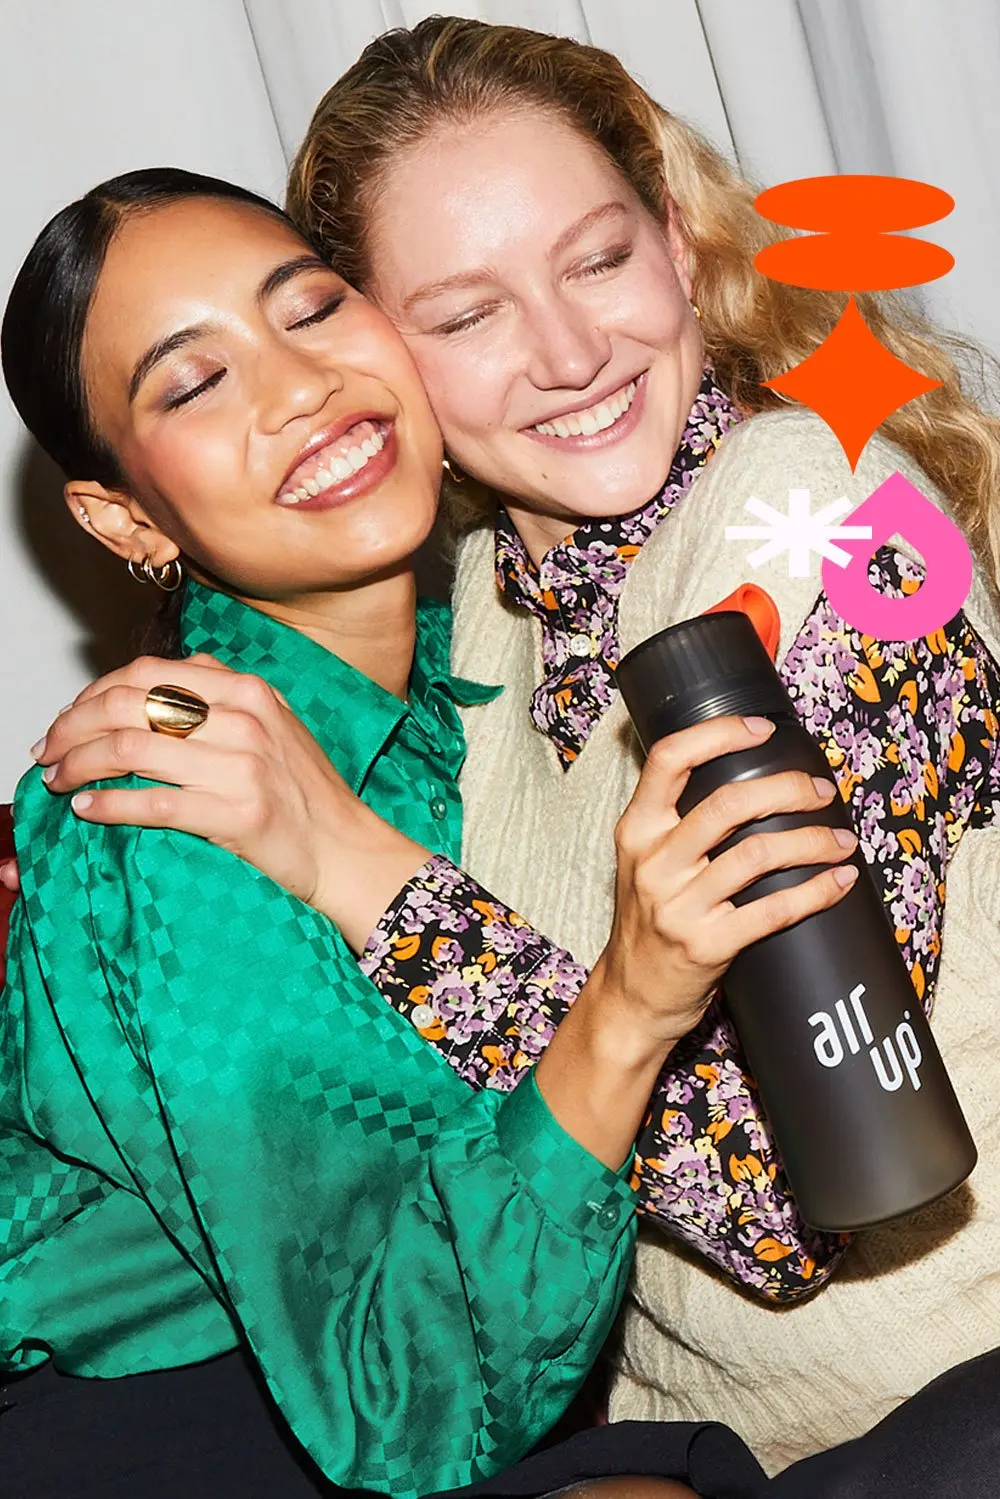 friends embrace with scent flavored water bottle